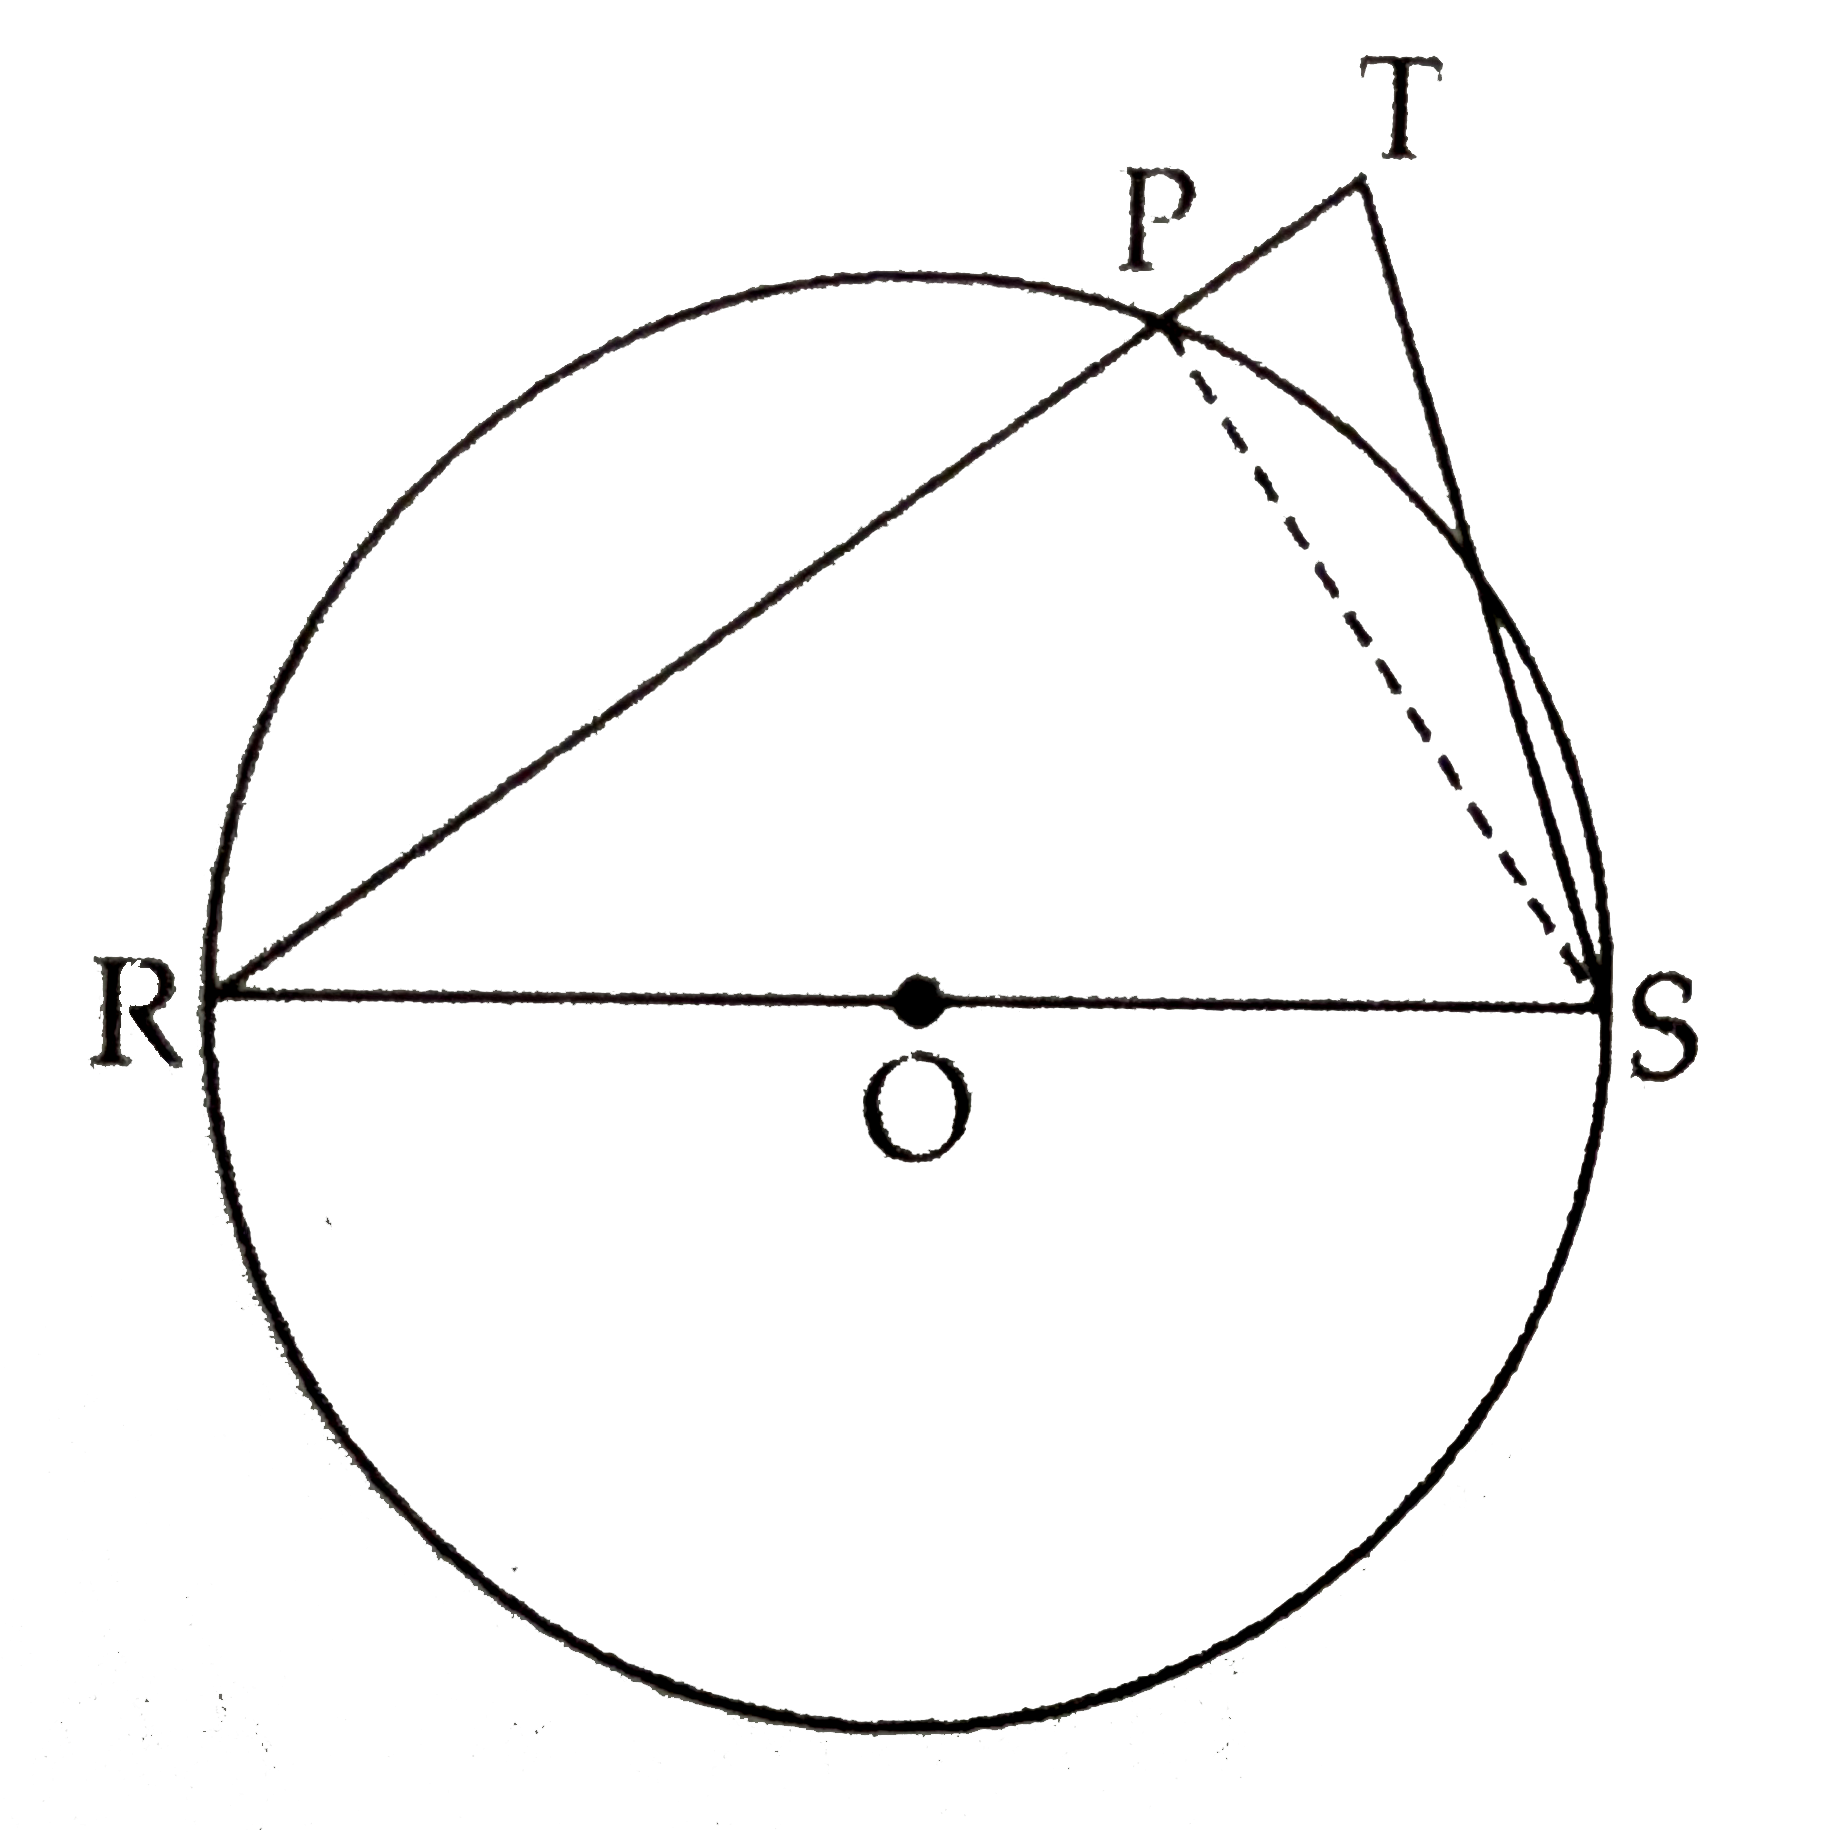 In  the adjoining figure seg RS is the dianeter of the circle with centre 'O' . Point T is in the exterior of the circle . Prove that  angleRTS  is an acute angle.